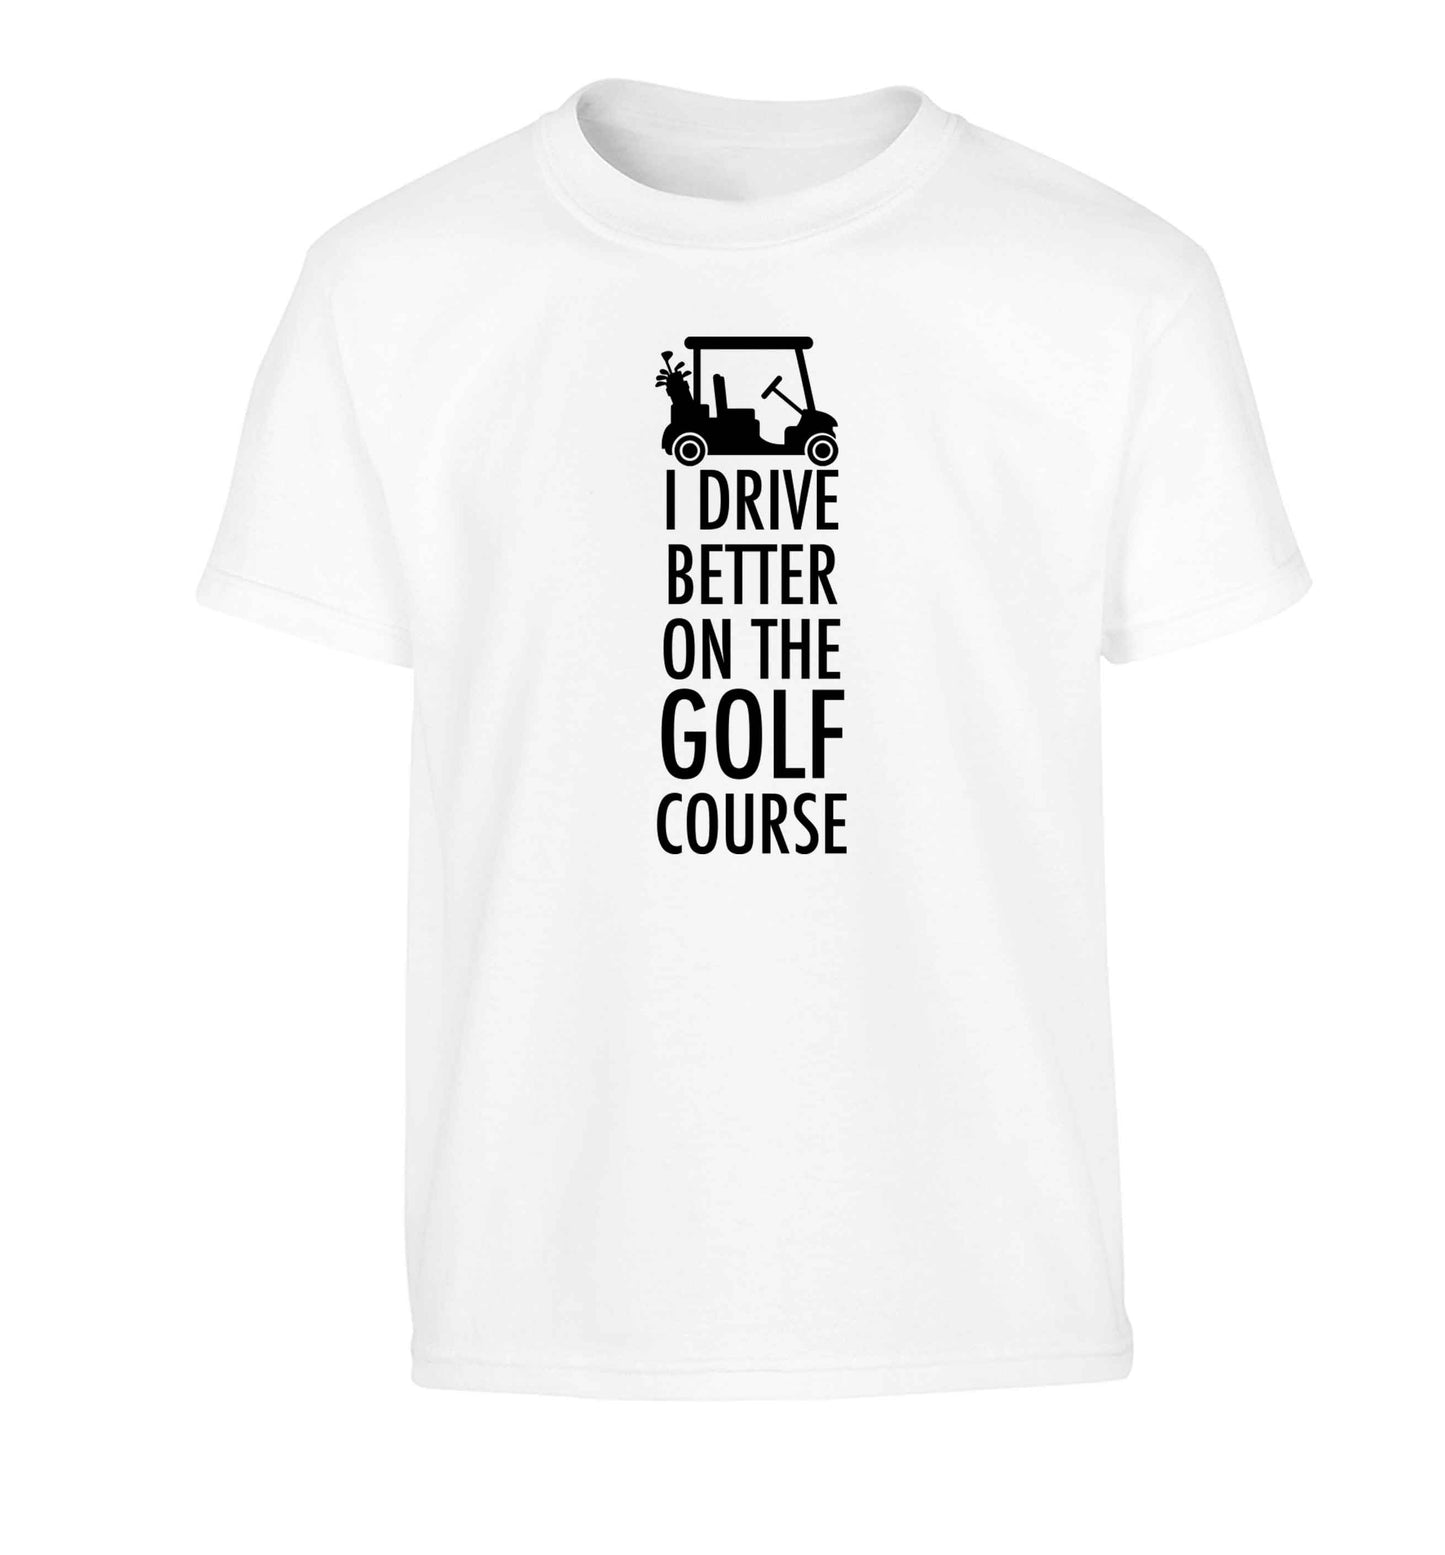 I drive better on the golf course Children's white Tshirt 12-13 Years